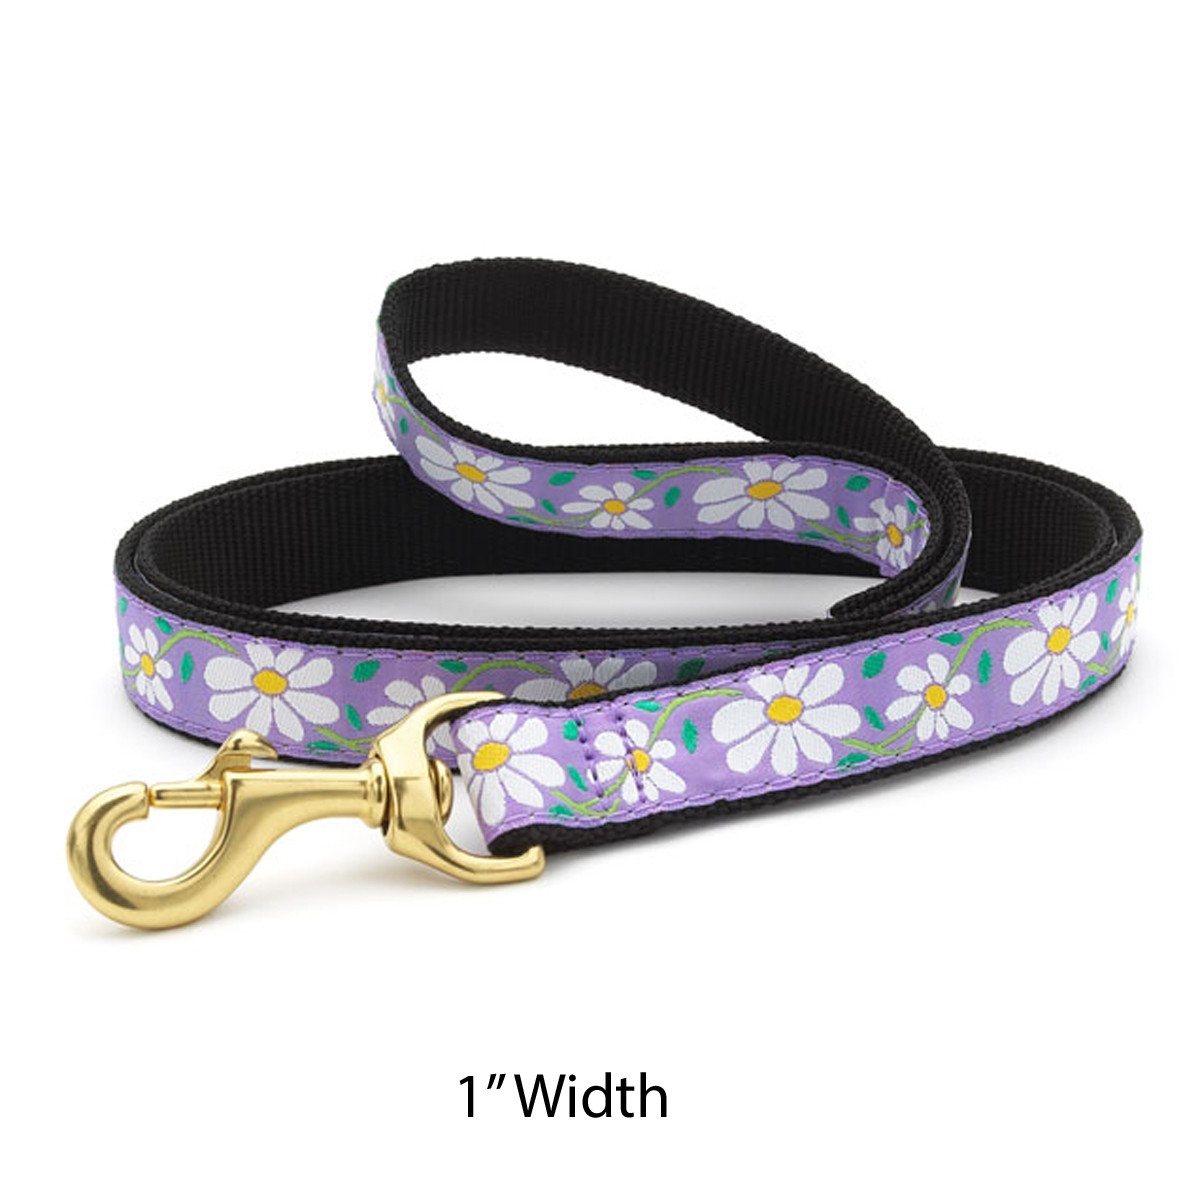 Daisy Dog Leash by Up Country